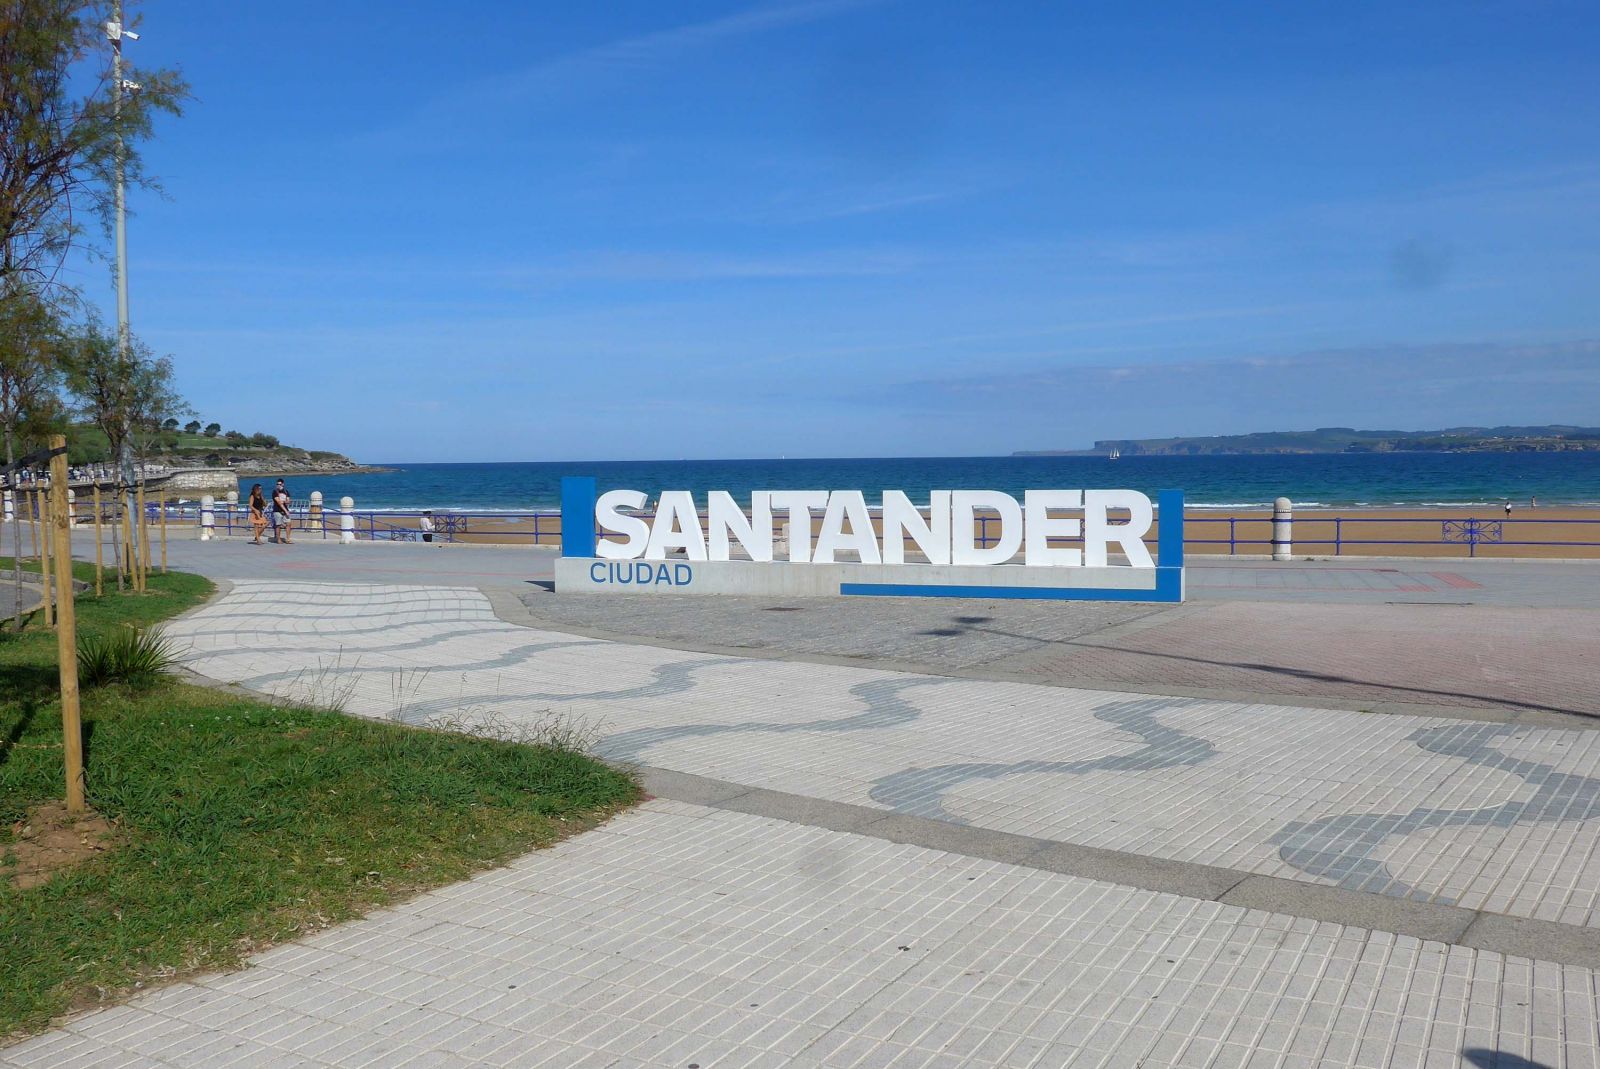 Santander, starting point of your ride across Spain